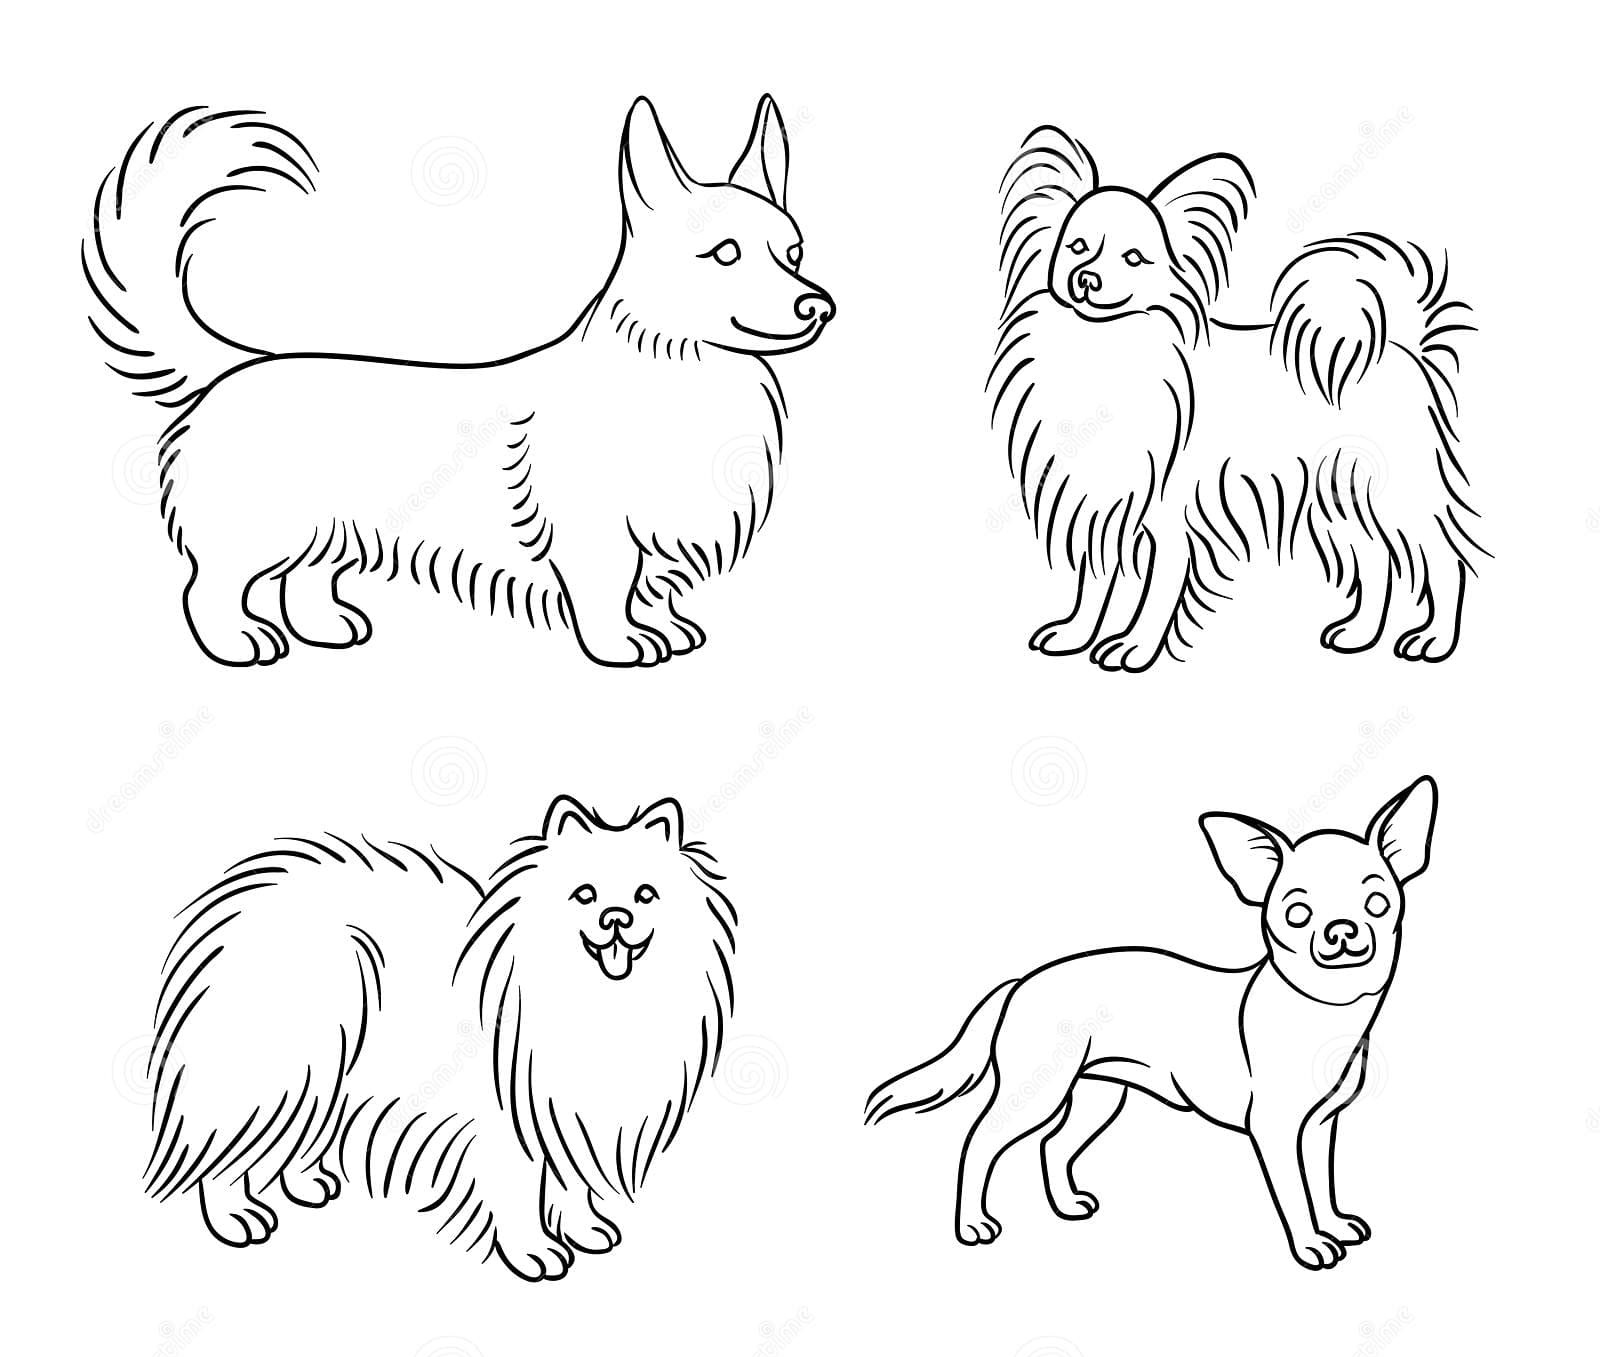 Chihuahua Dog Outline Image For Kids Coloring Page